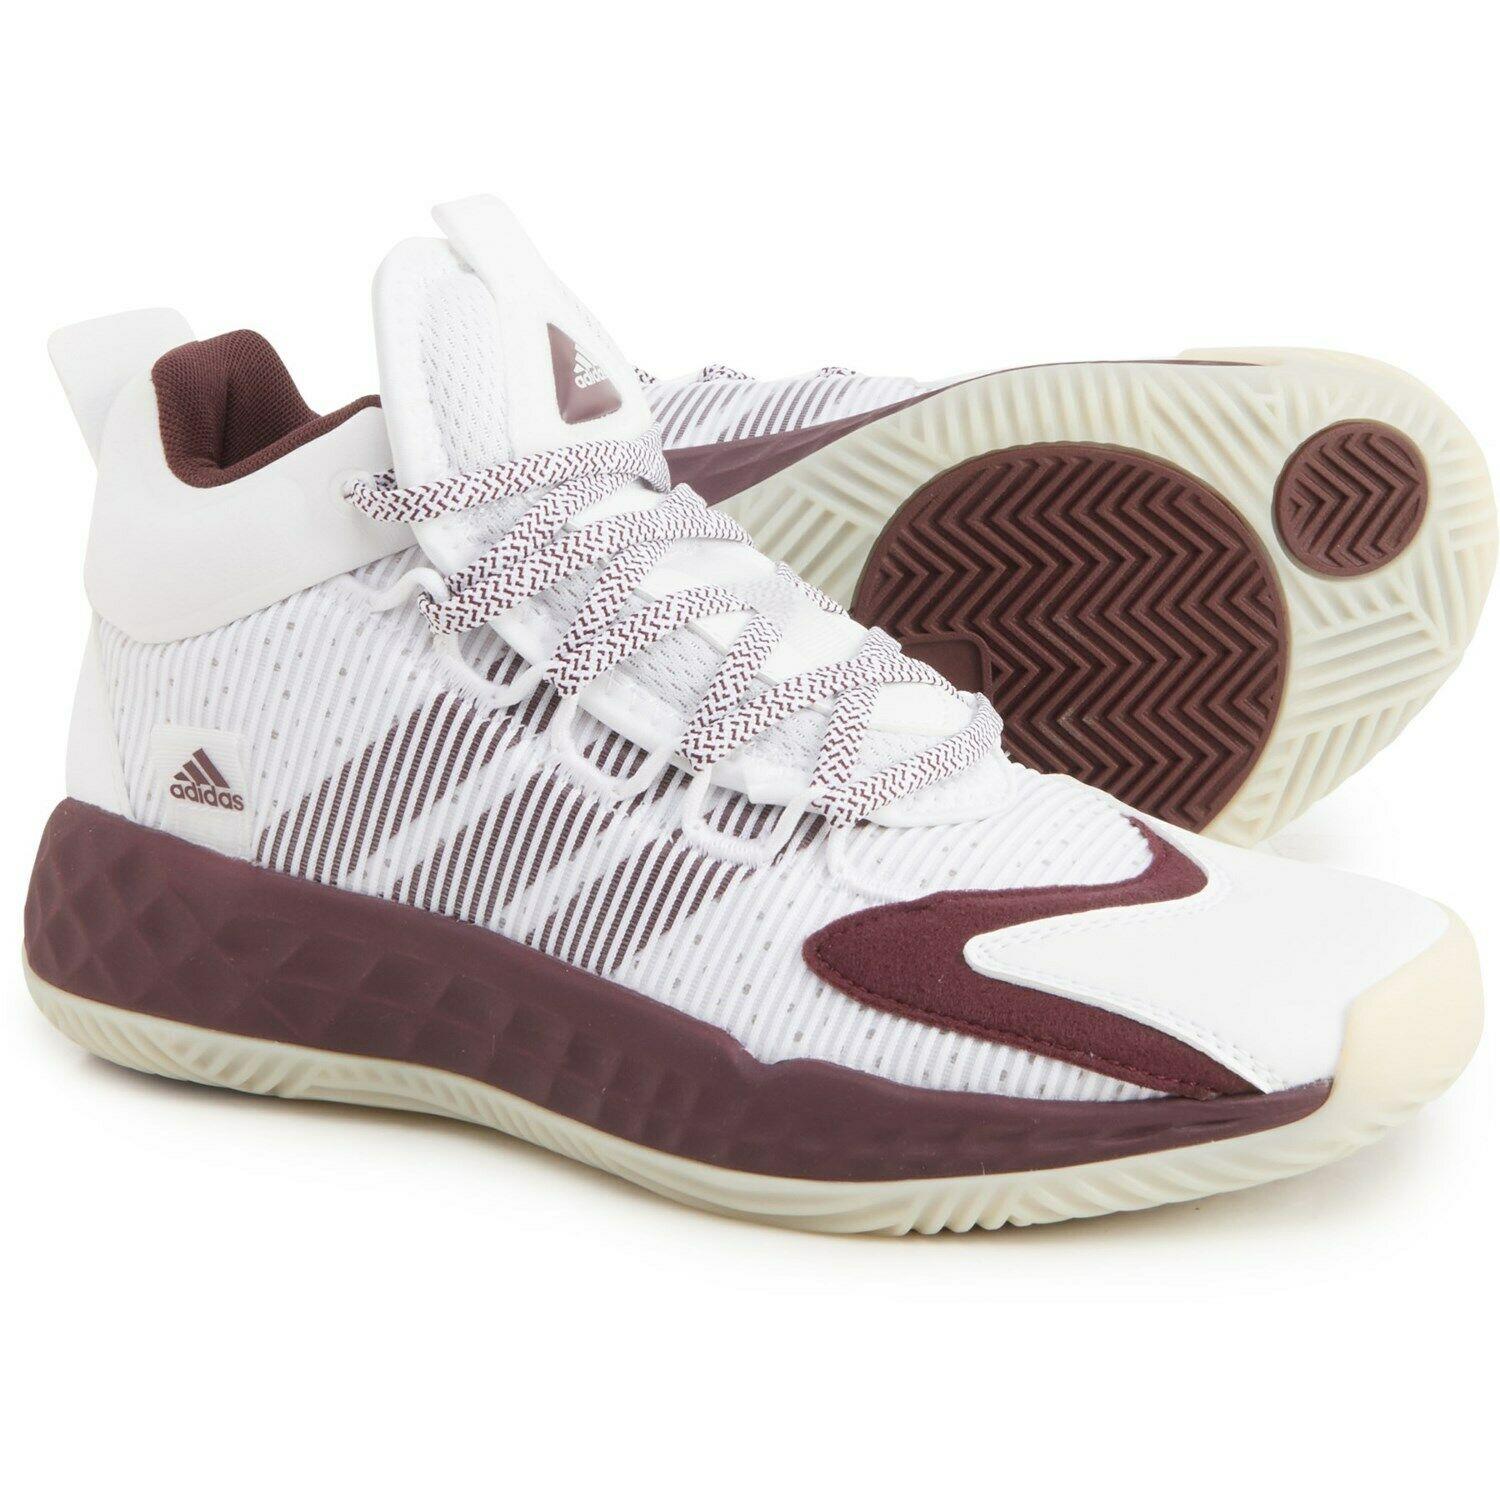 Adidas Pro Boost Low Basketball Shoes For Men Yellow Size 13 - White/magenta